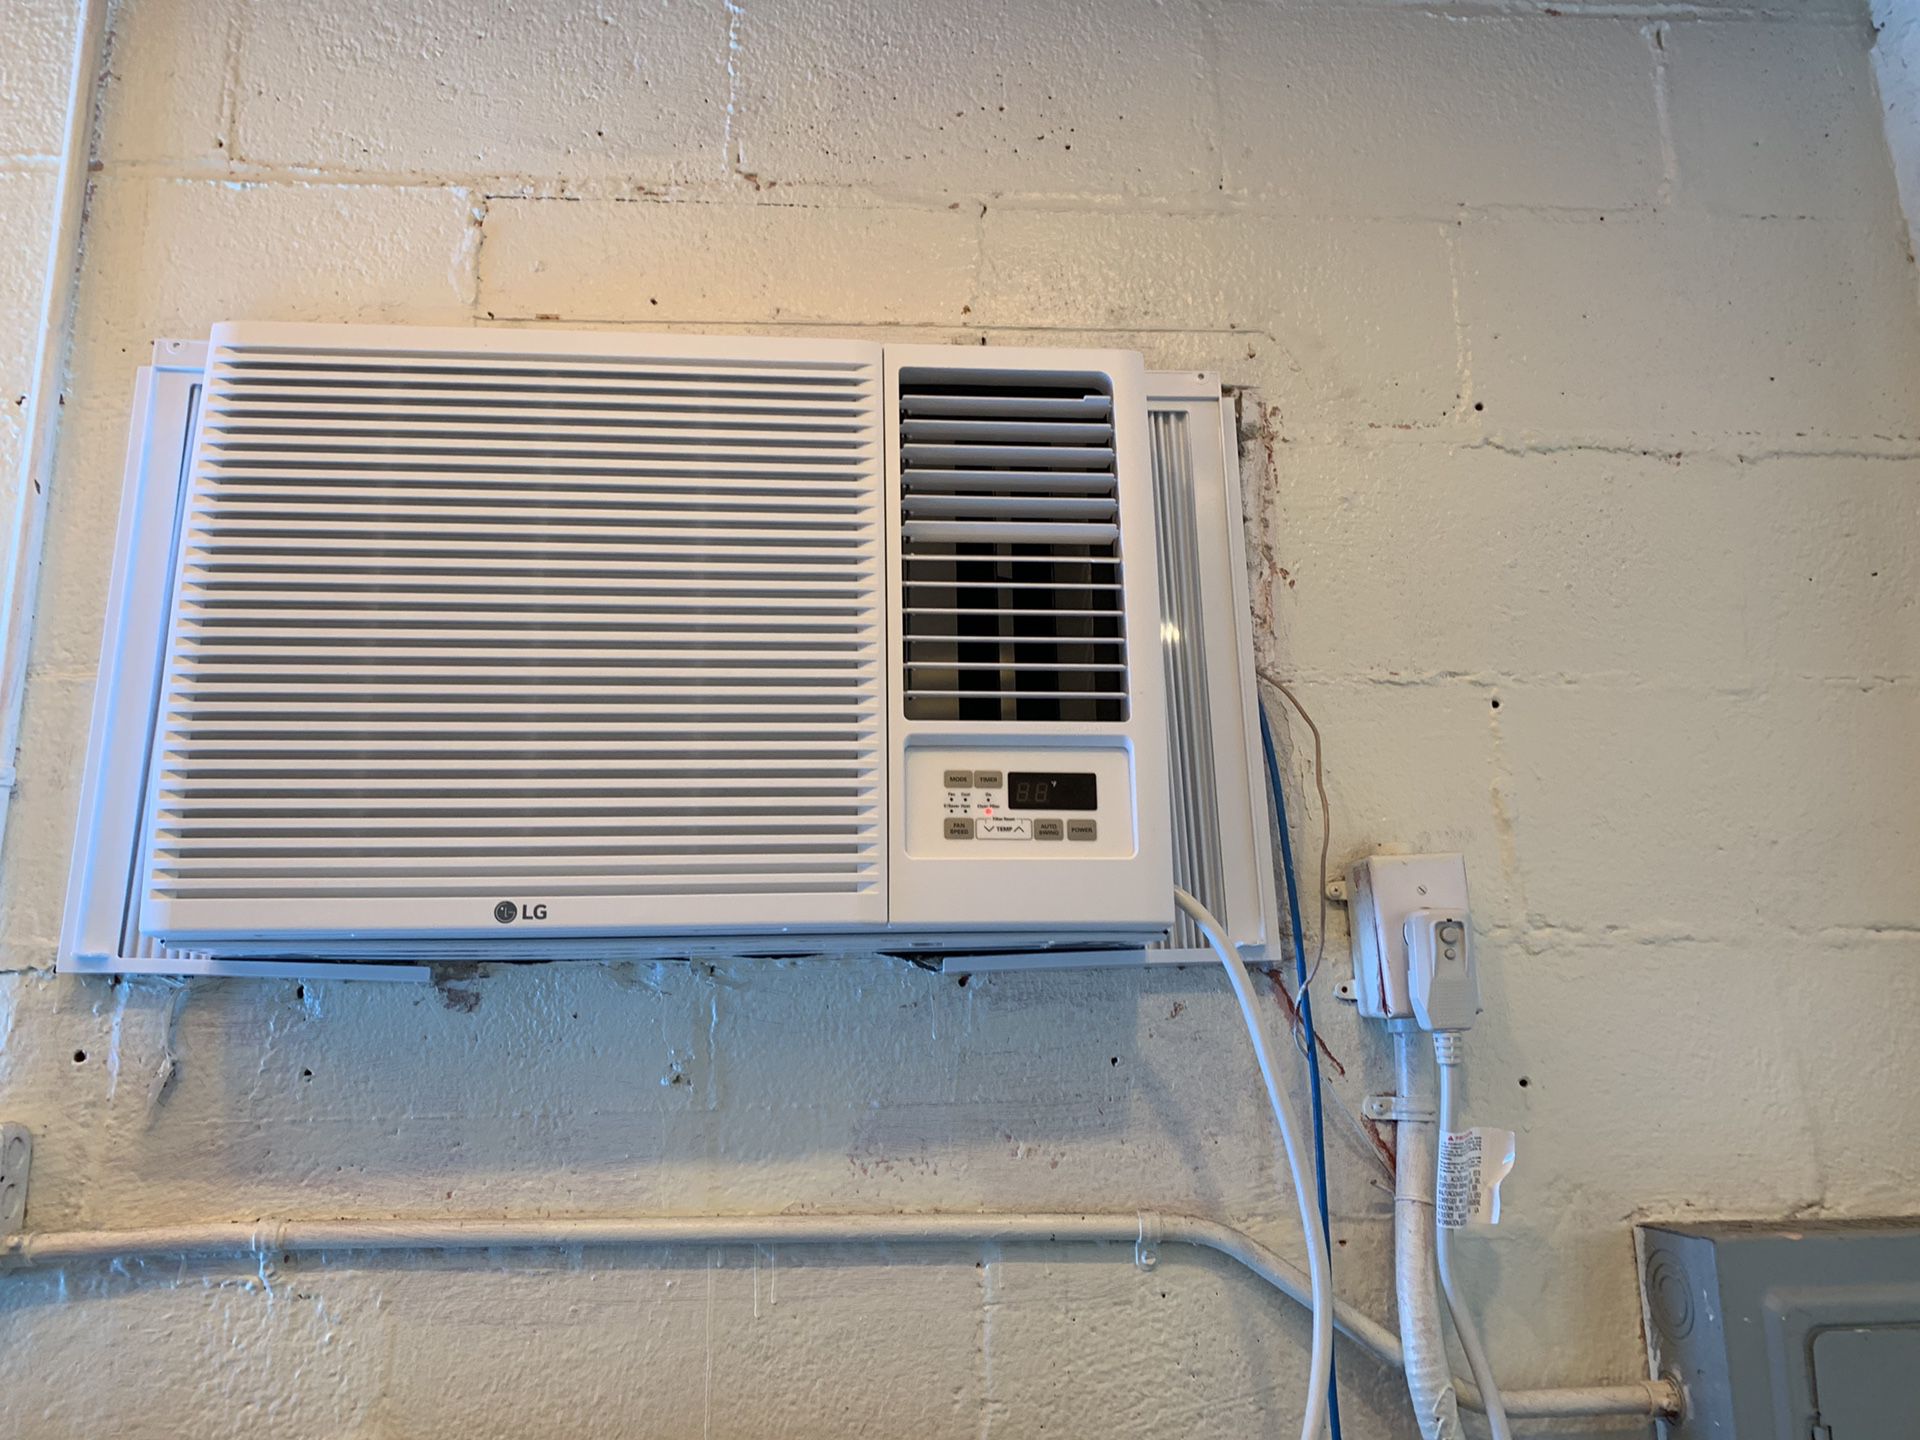 Almost new window Air conditioner.